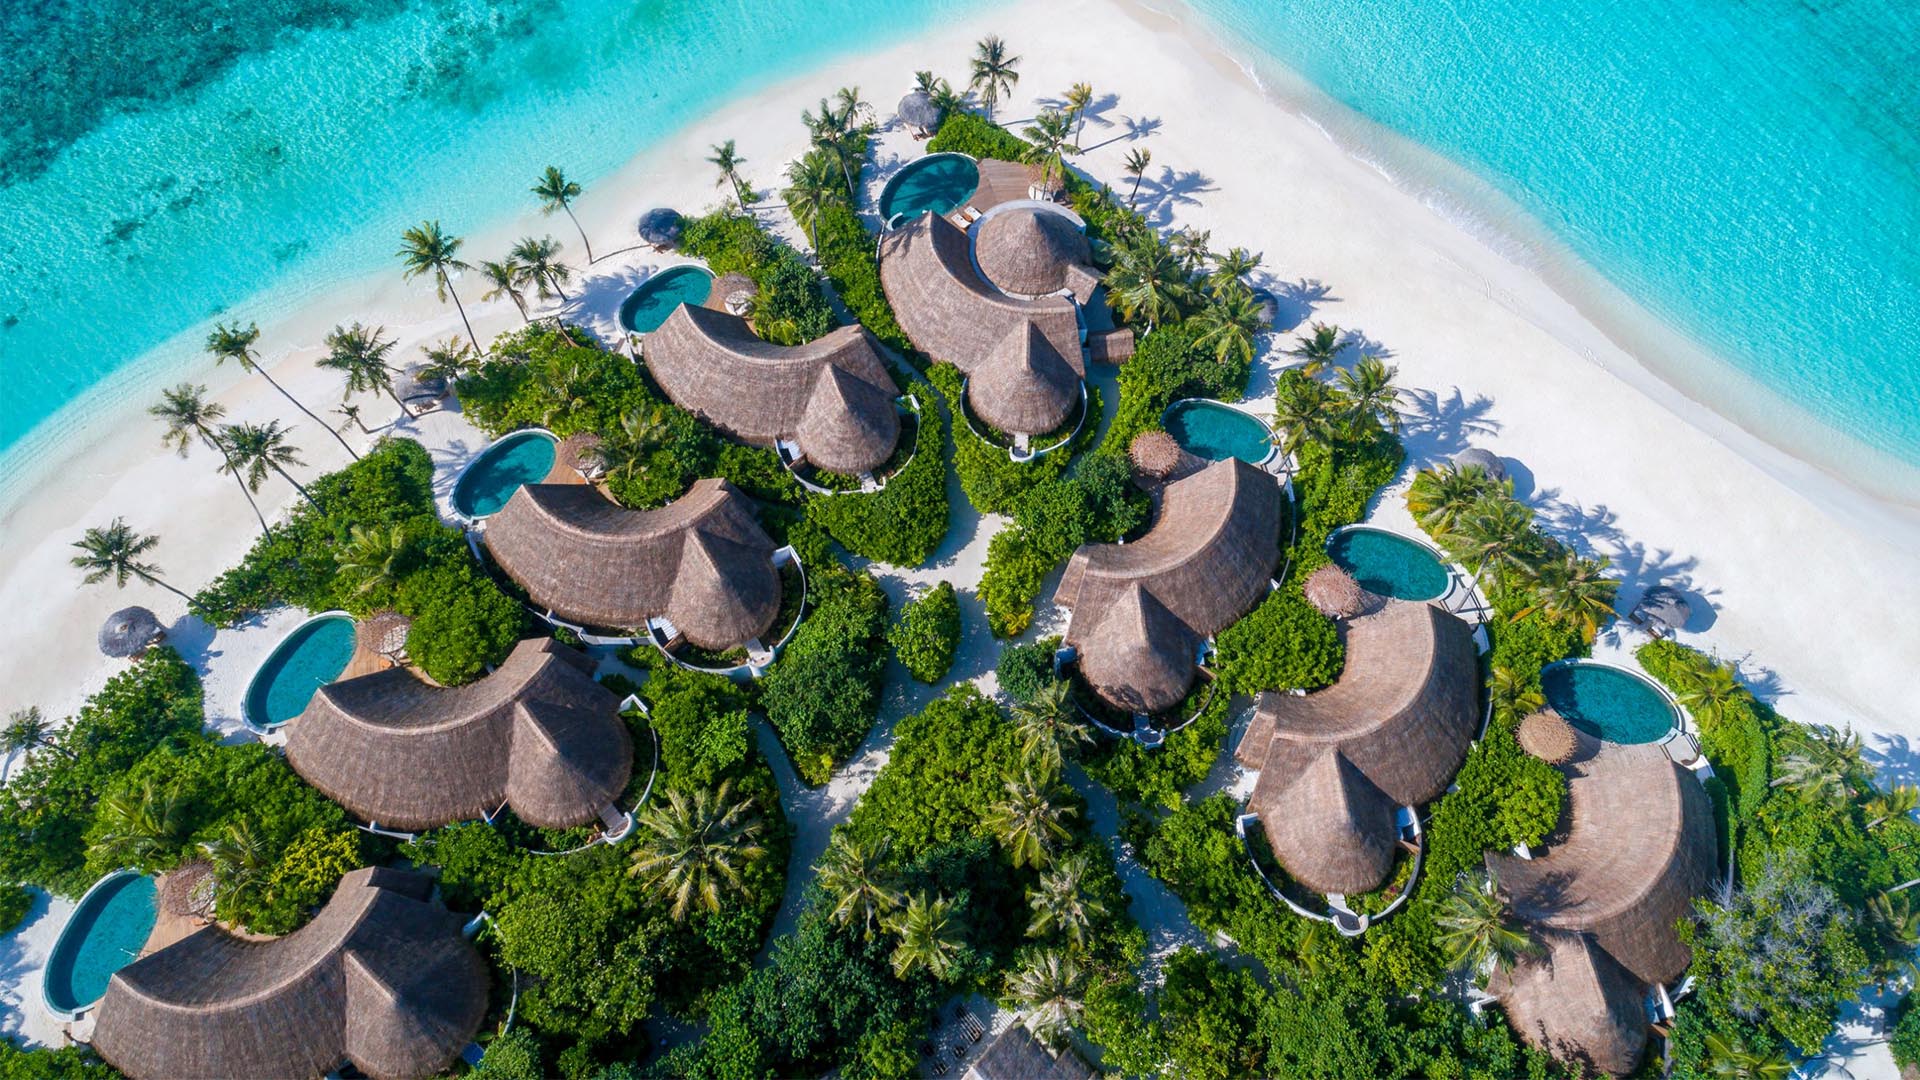 5 private island hotels to daydream about